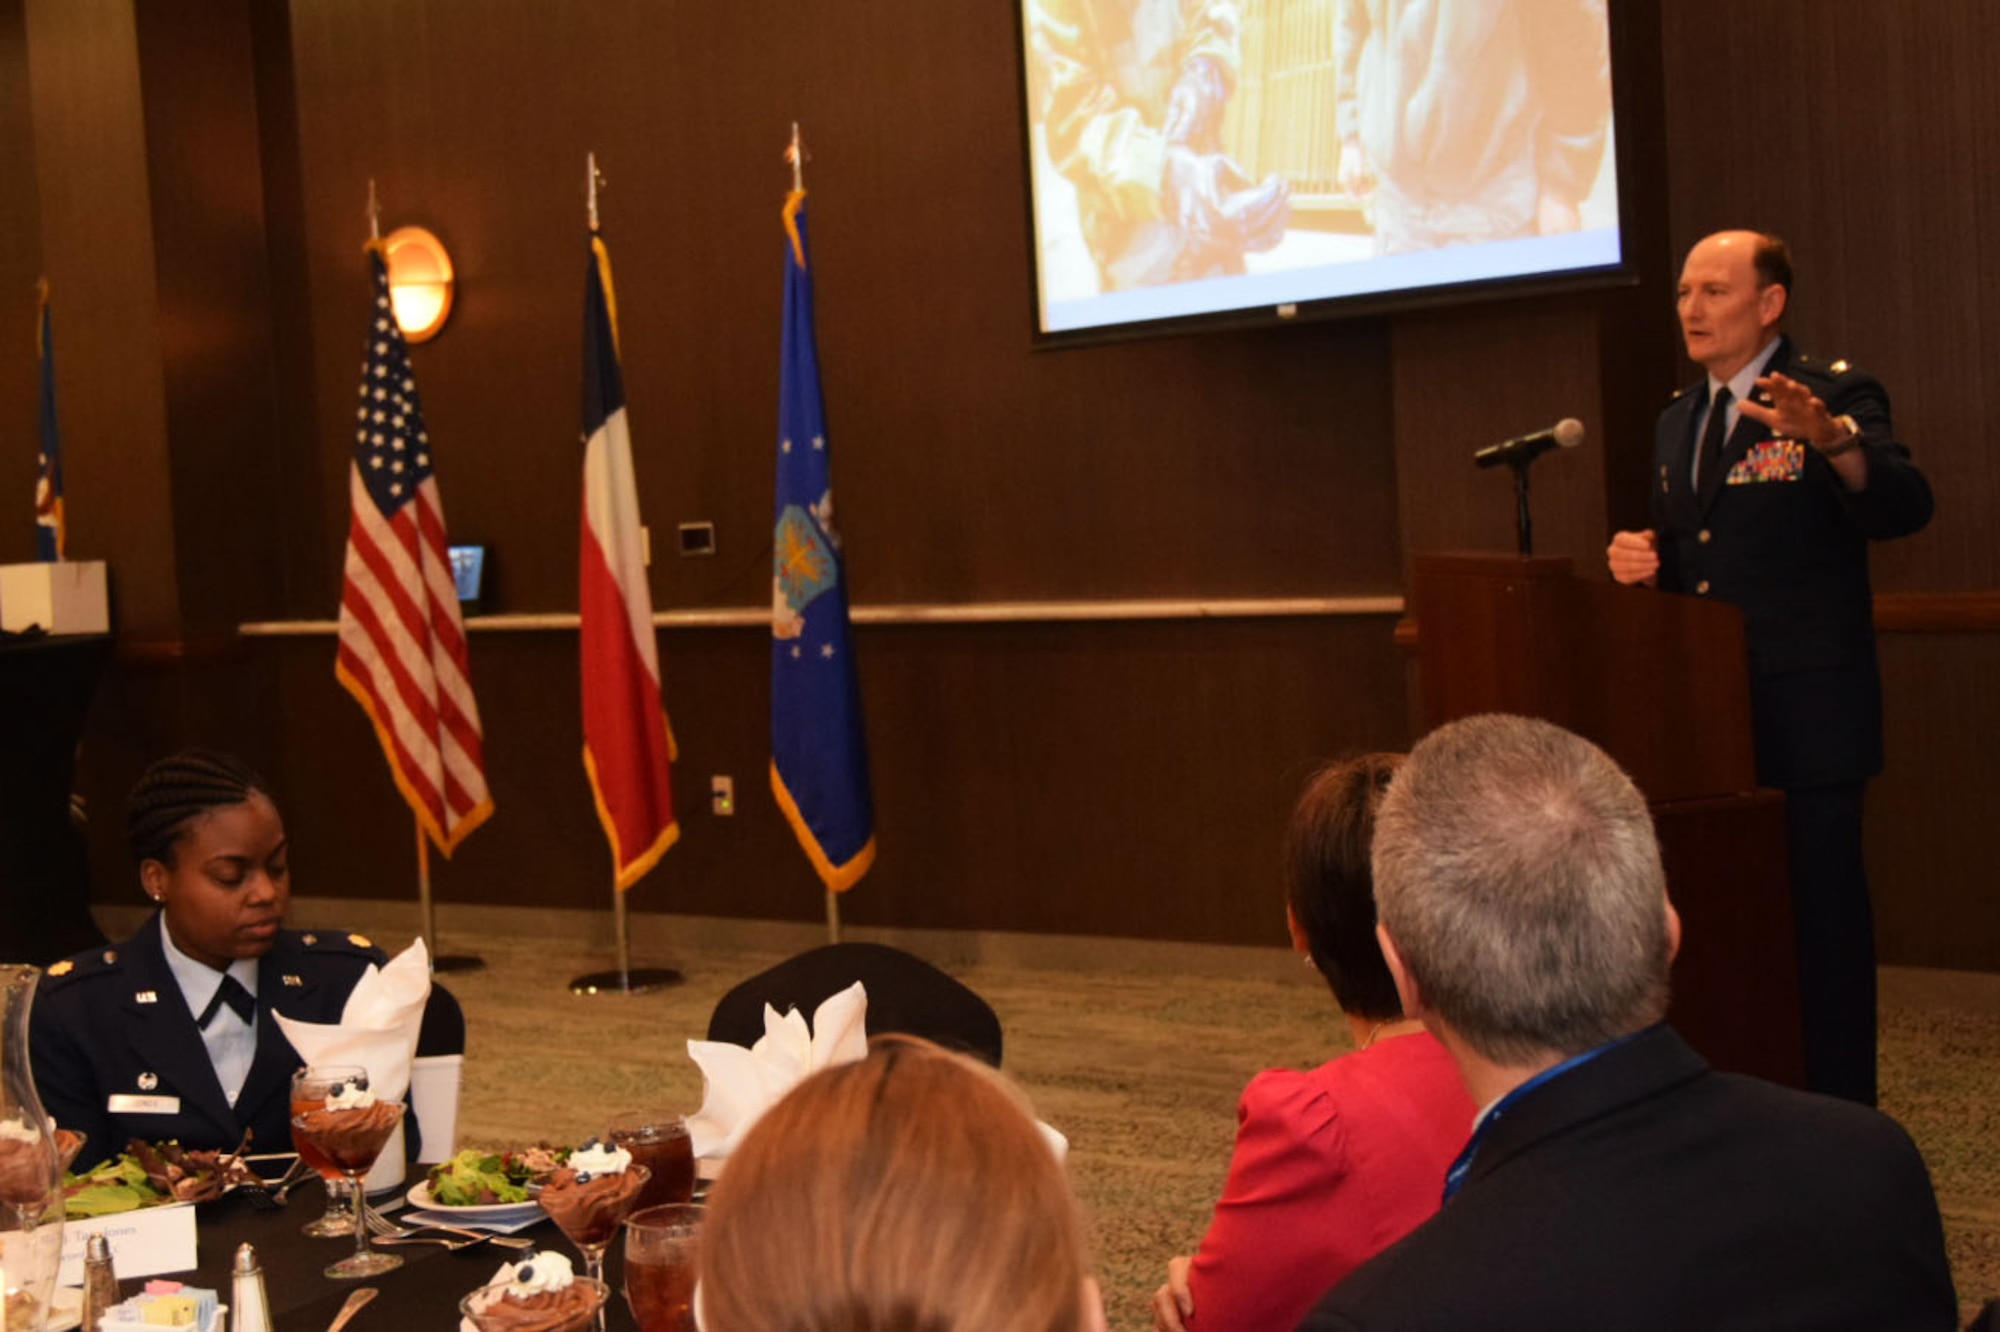 Col. Thomas K. Smith, Jr. , 433rd Airlift Wing commander,  welcomes 16 local civic leaders prior to the 433rd Airlift Wing's Honorary Commanders Program induction ceremony April1, 2017. The executive-level program is in its sixth year in the Alamo Wing and strengthens ties between the military and the local business community.  (U.S. Air Force photo by Tech. Sgt. Carlos J. Treviño)